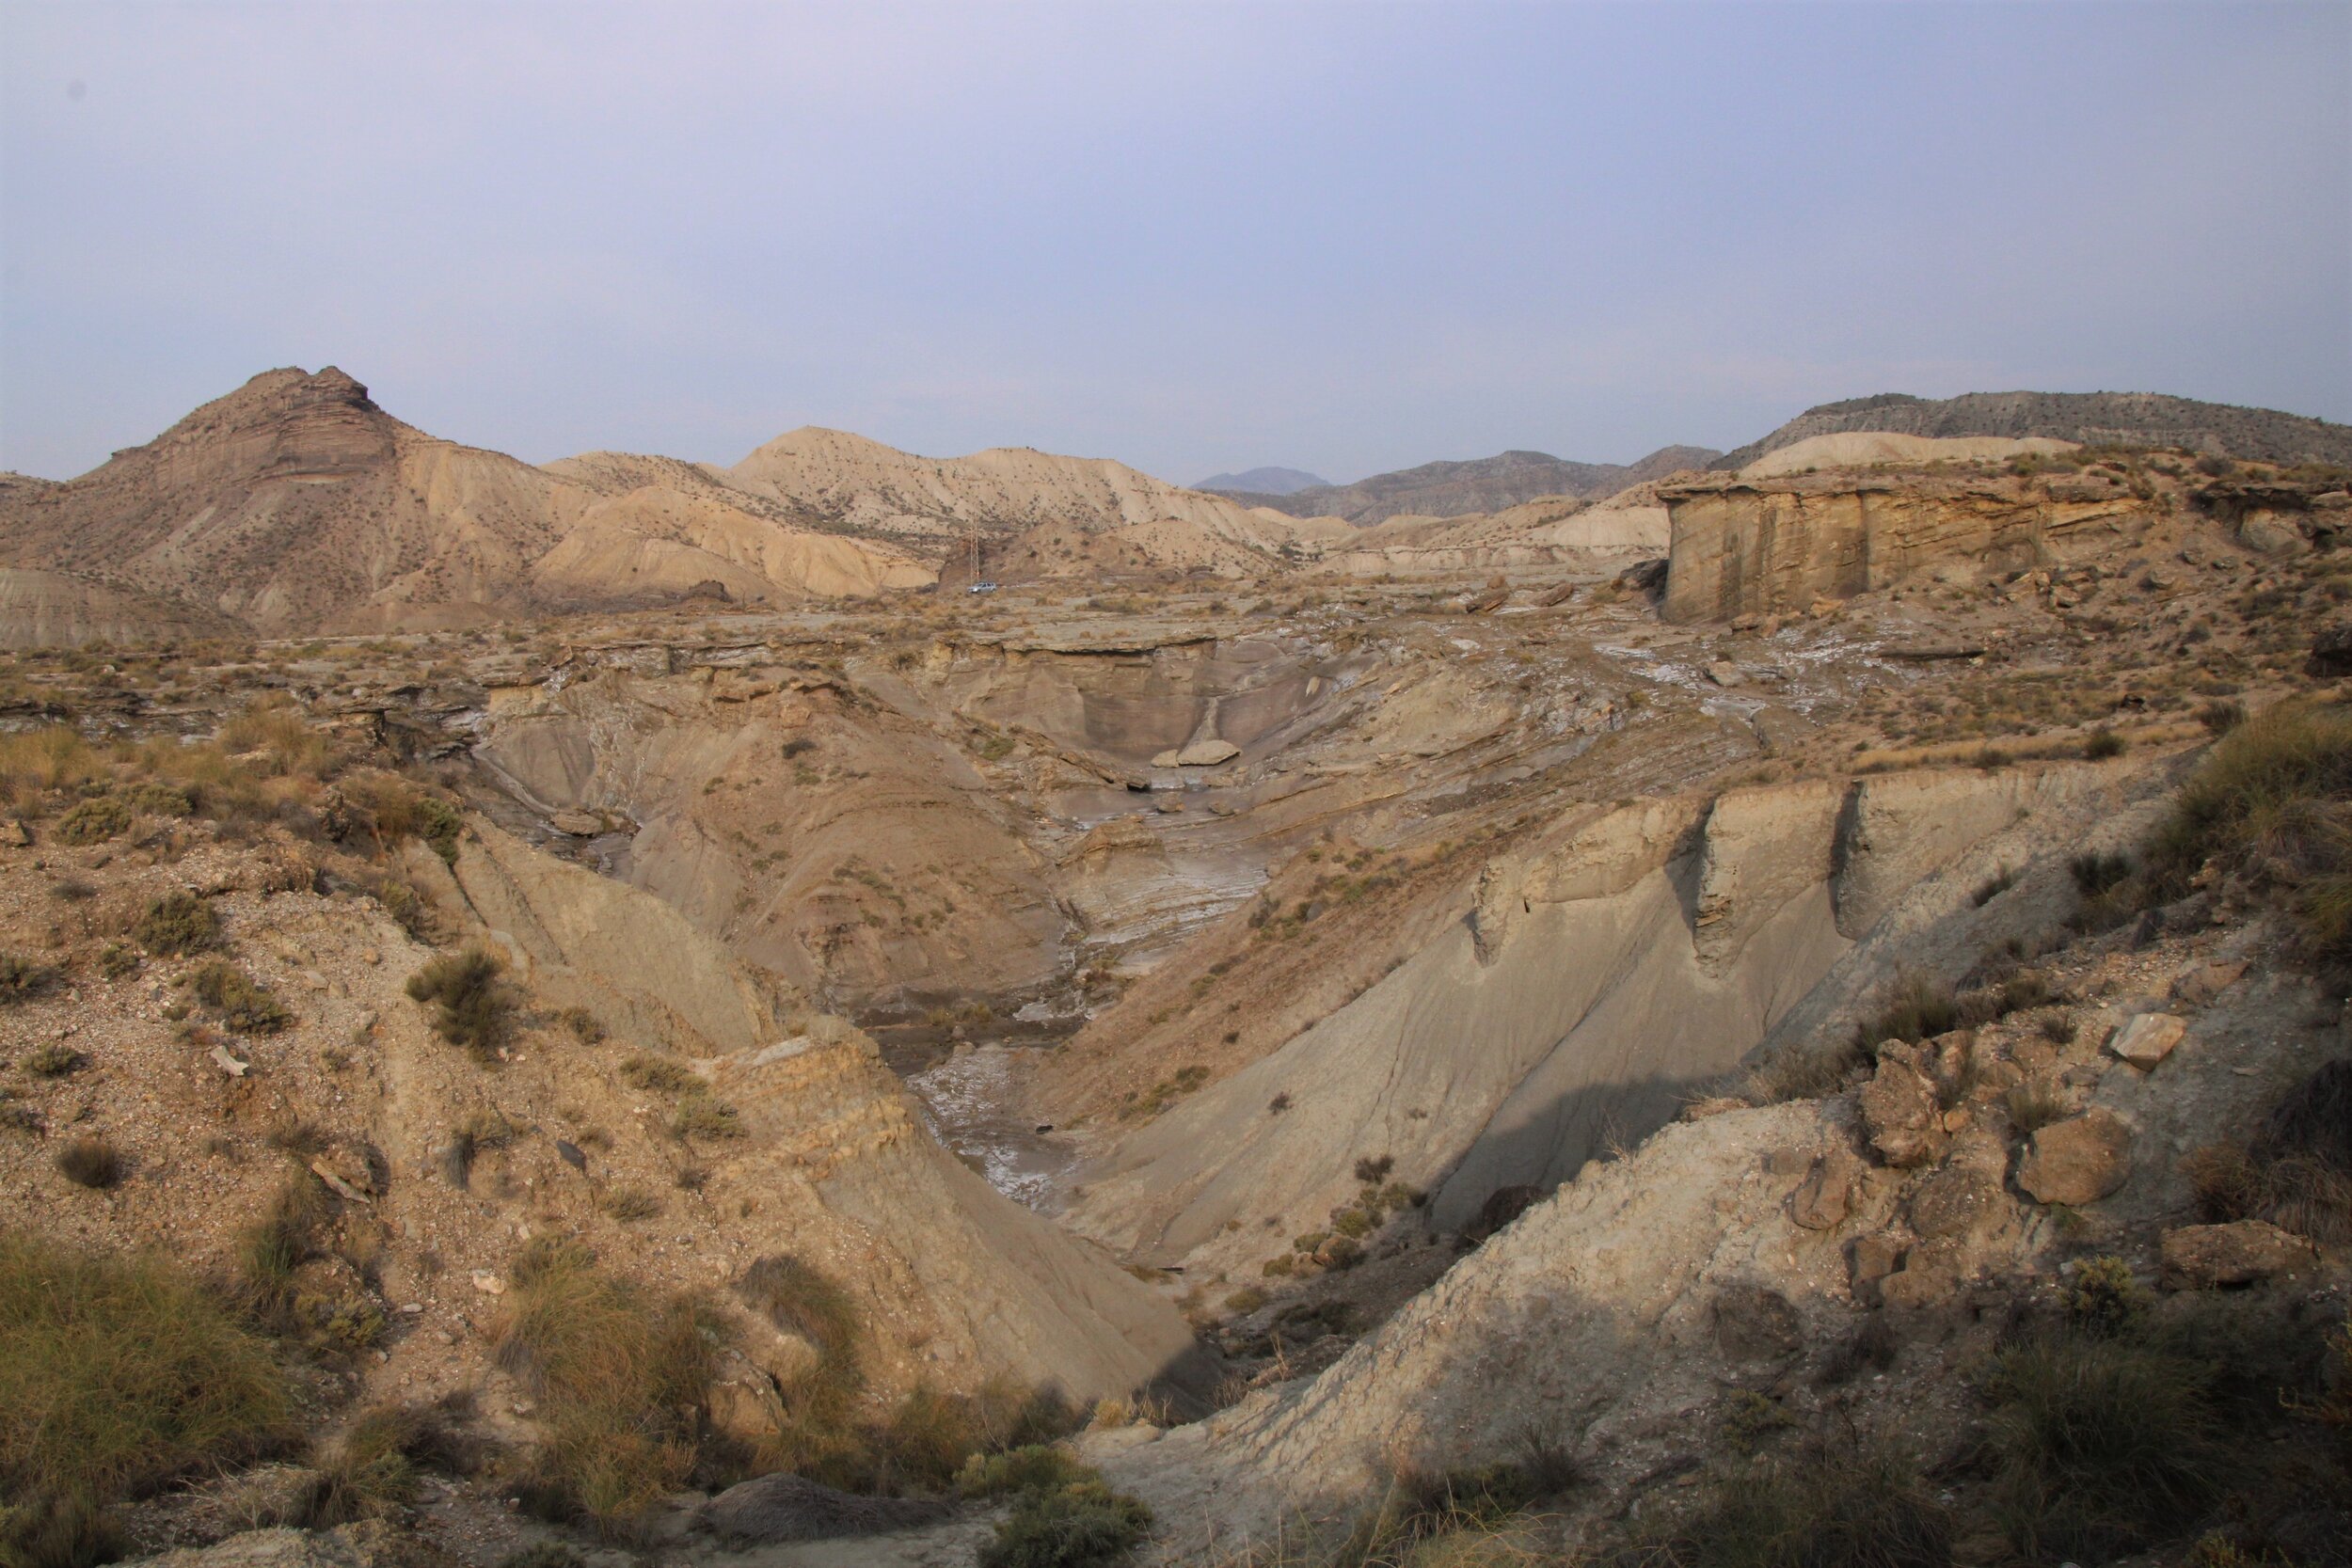   THE TABERNAS, Almeria, Spain. October 2nd, 2021. PICTURED:  A classic Utah-like desert landscape opens up at the top of a “Rambla” or dry riverbed.  Photo credit:  Andy Corbley ©. 